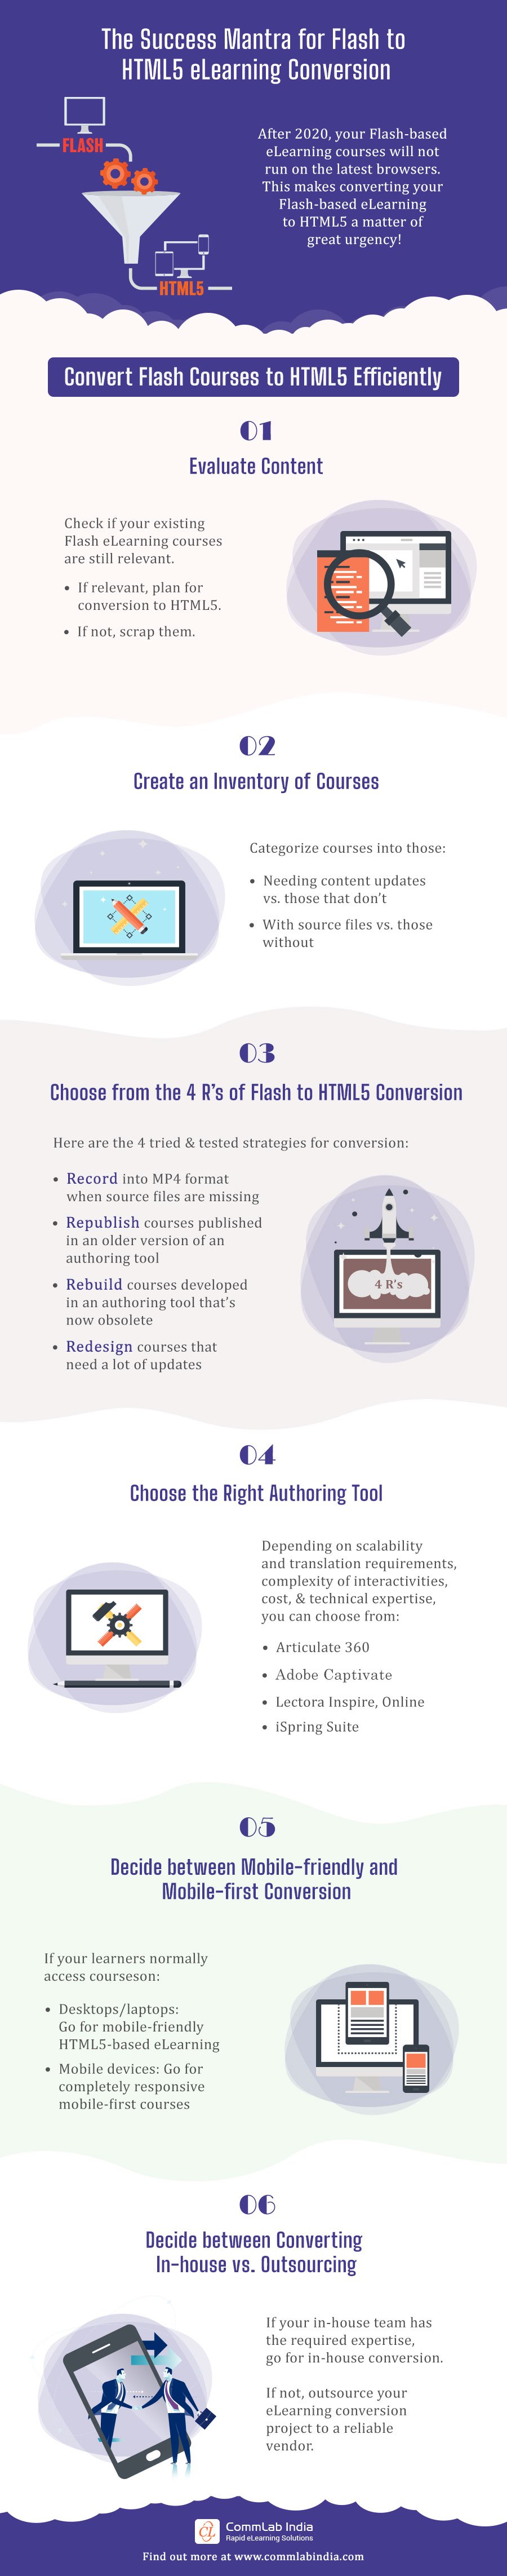 Flash to HTML5 eLearning Conversion: 6 Steps to Success